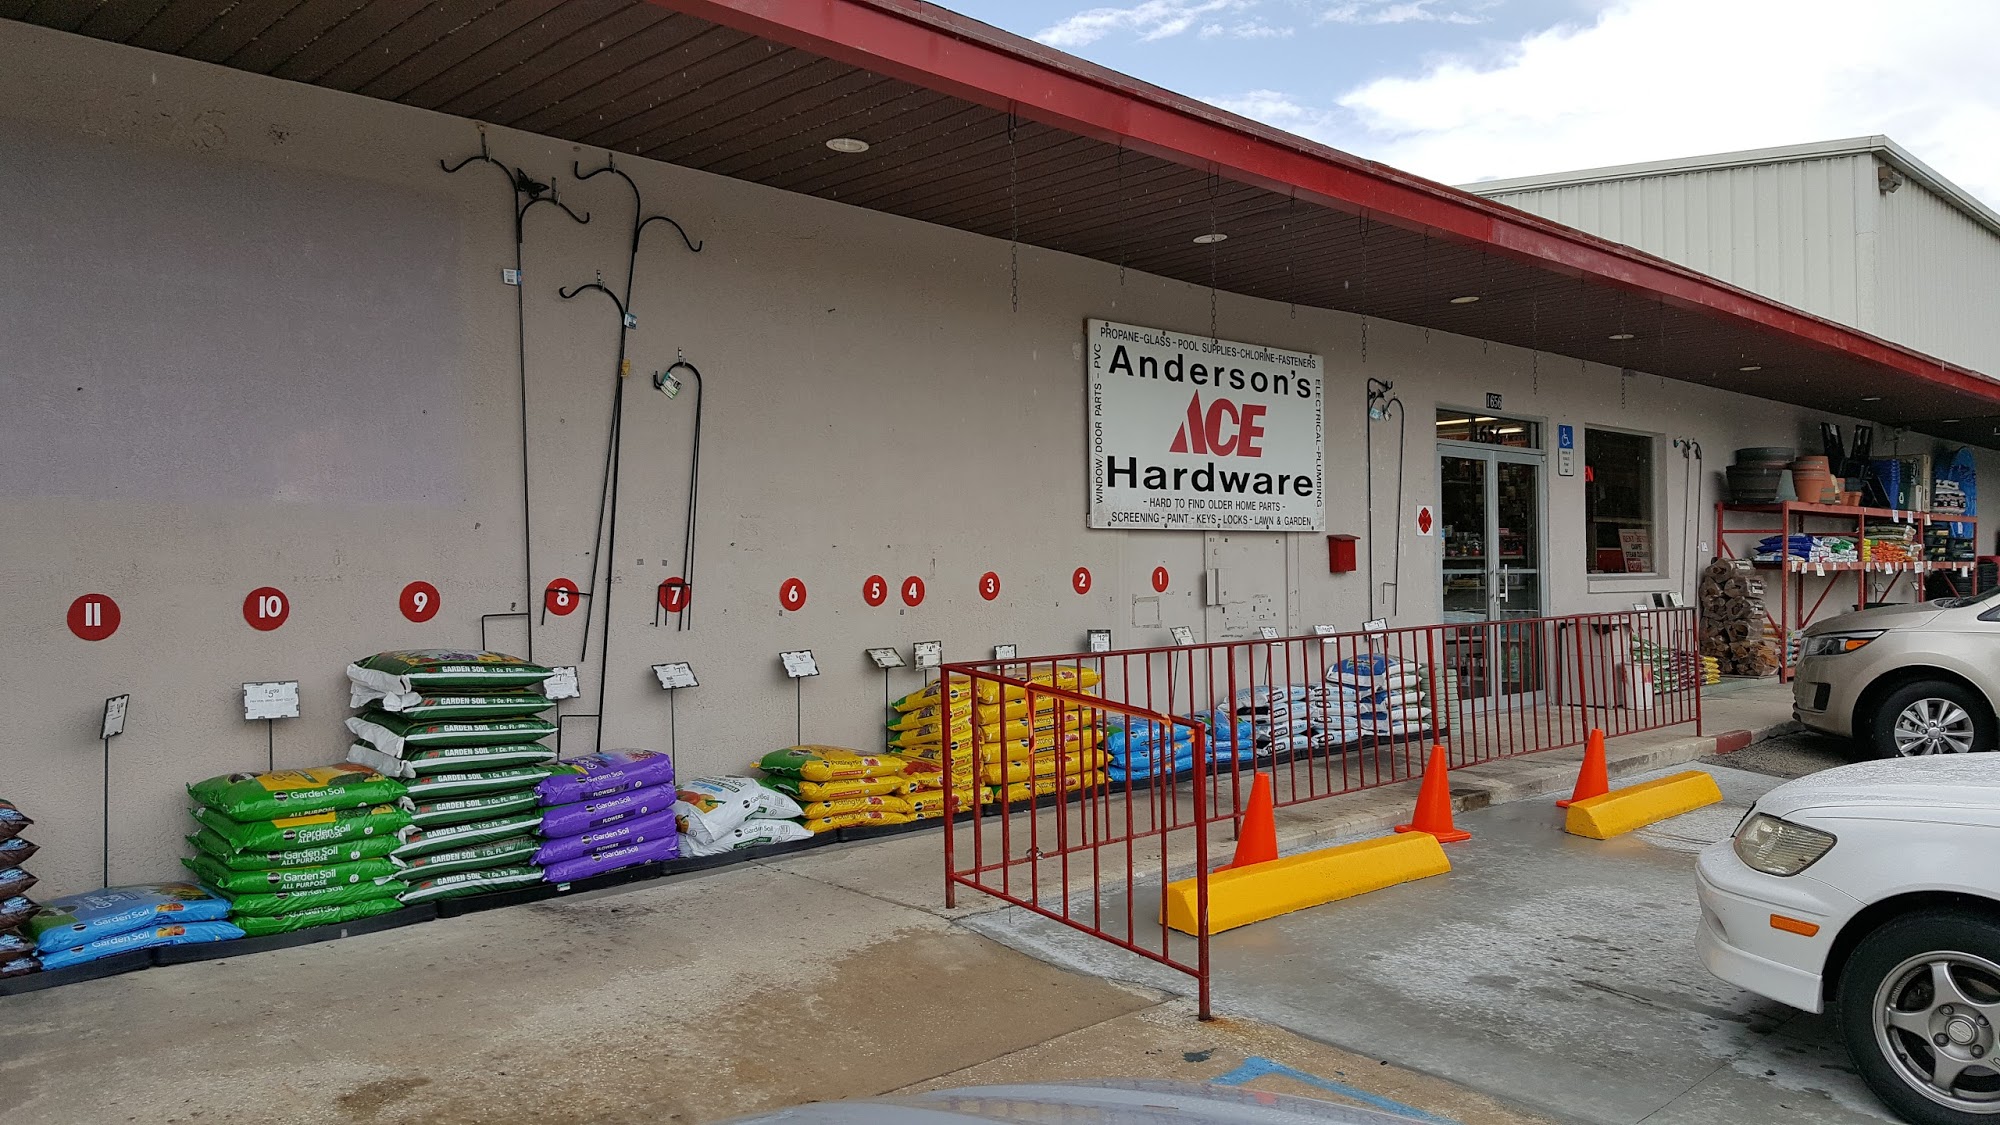 Anderson's Ace Hardware Inc